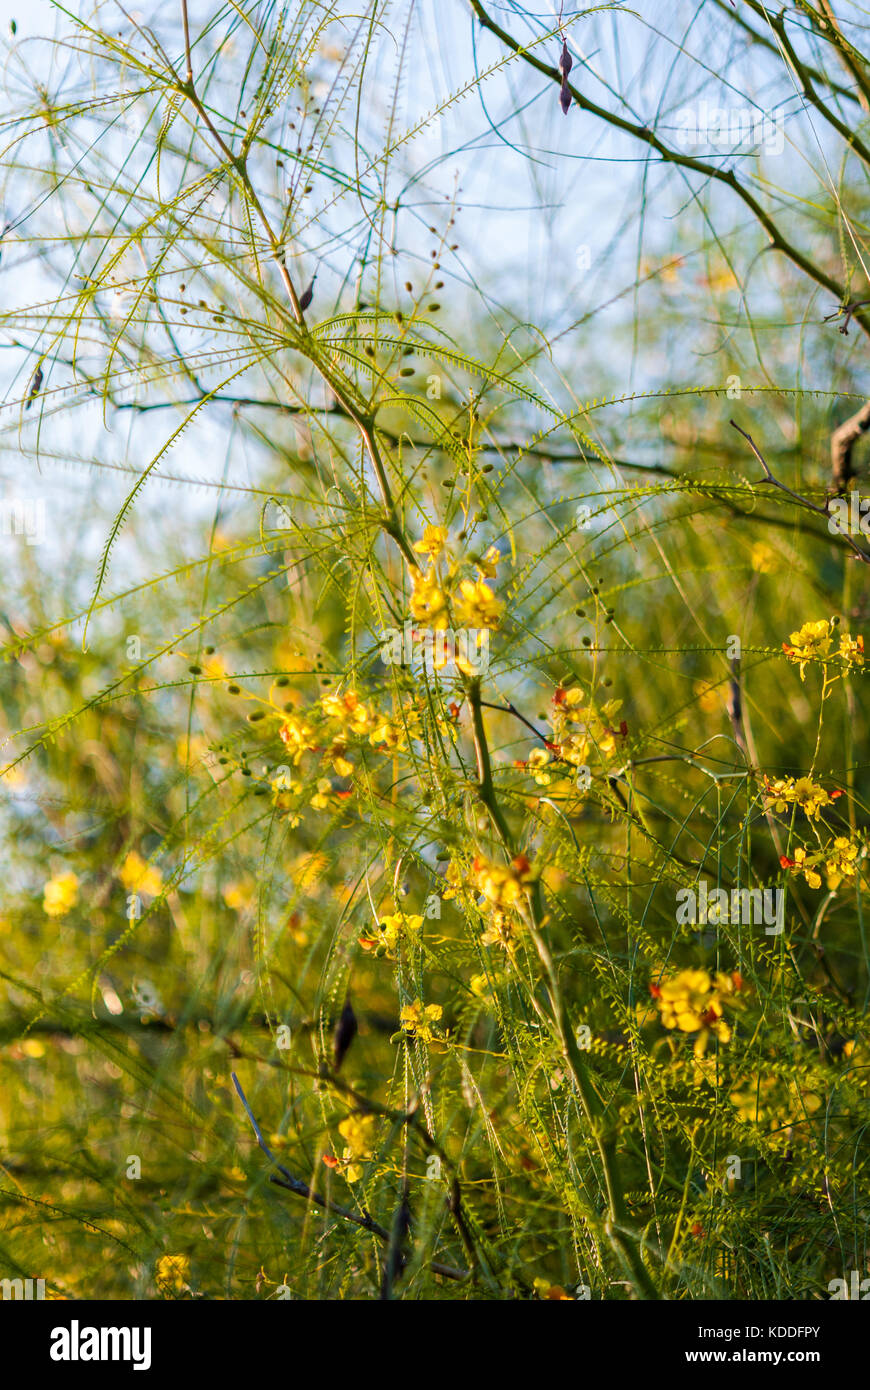 Desert Museum Palo Verde tree branches with flowers close-up Stock Photo